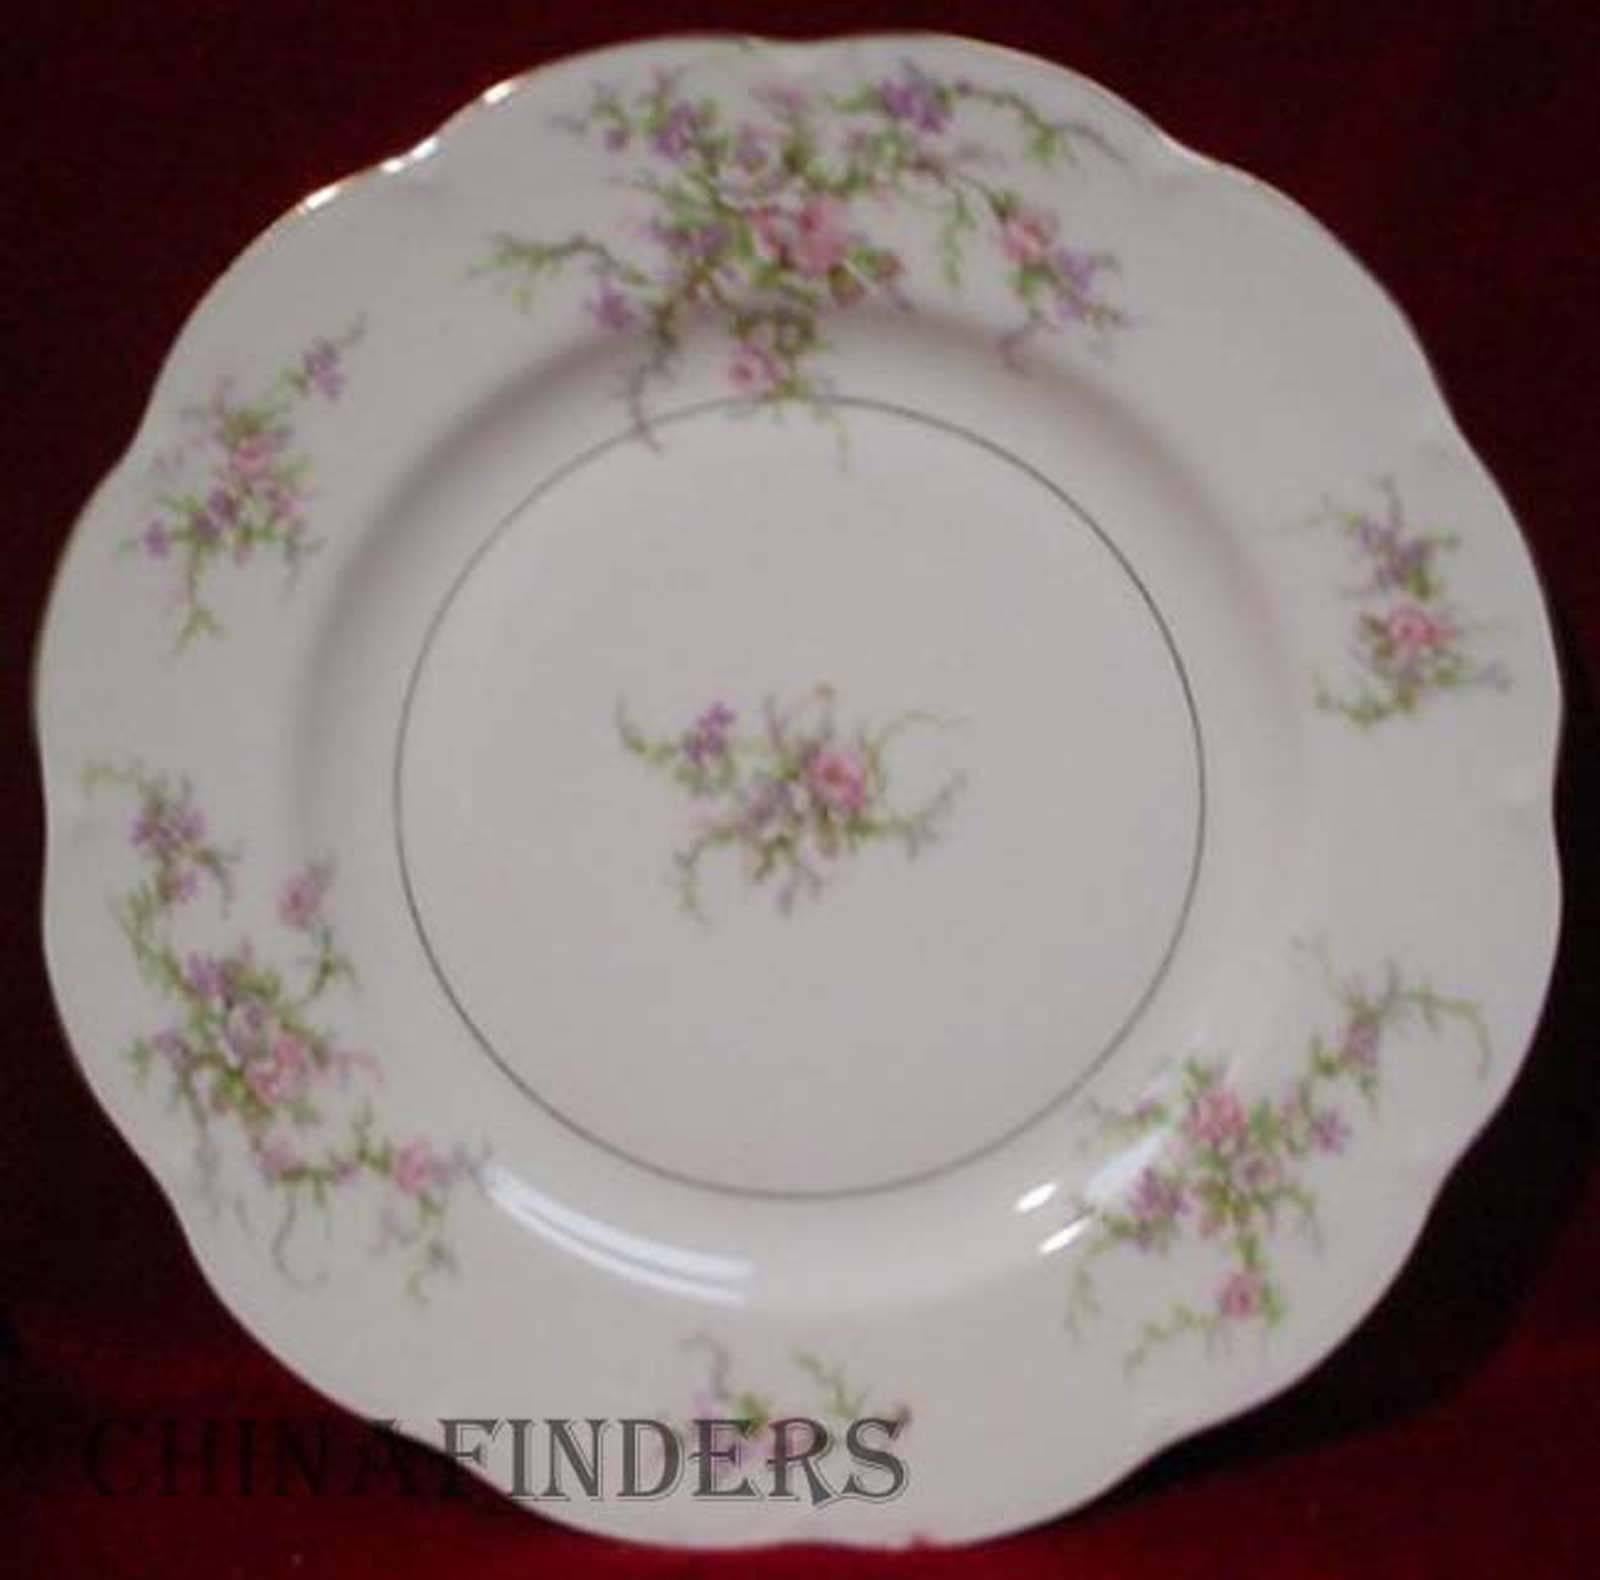 CHINA FINDERS 

China, Crystal, Flatware and Collectible Matching Service is offering ONE (1) 

HAVILAND china NEW York ROSALINDE pattern 53-piece SET SERVICE 

in great condition free from chips, cracks, break, stain, or discoloration and